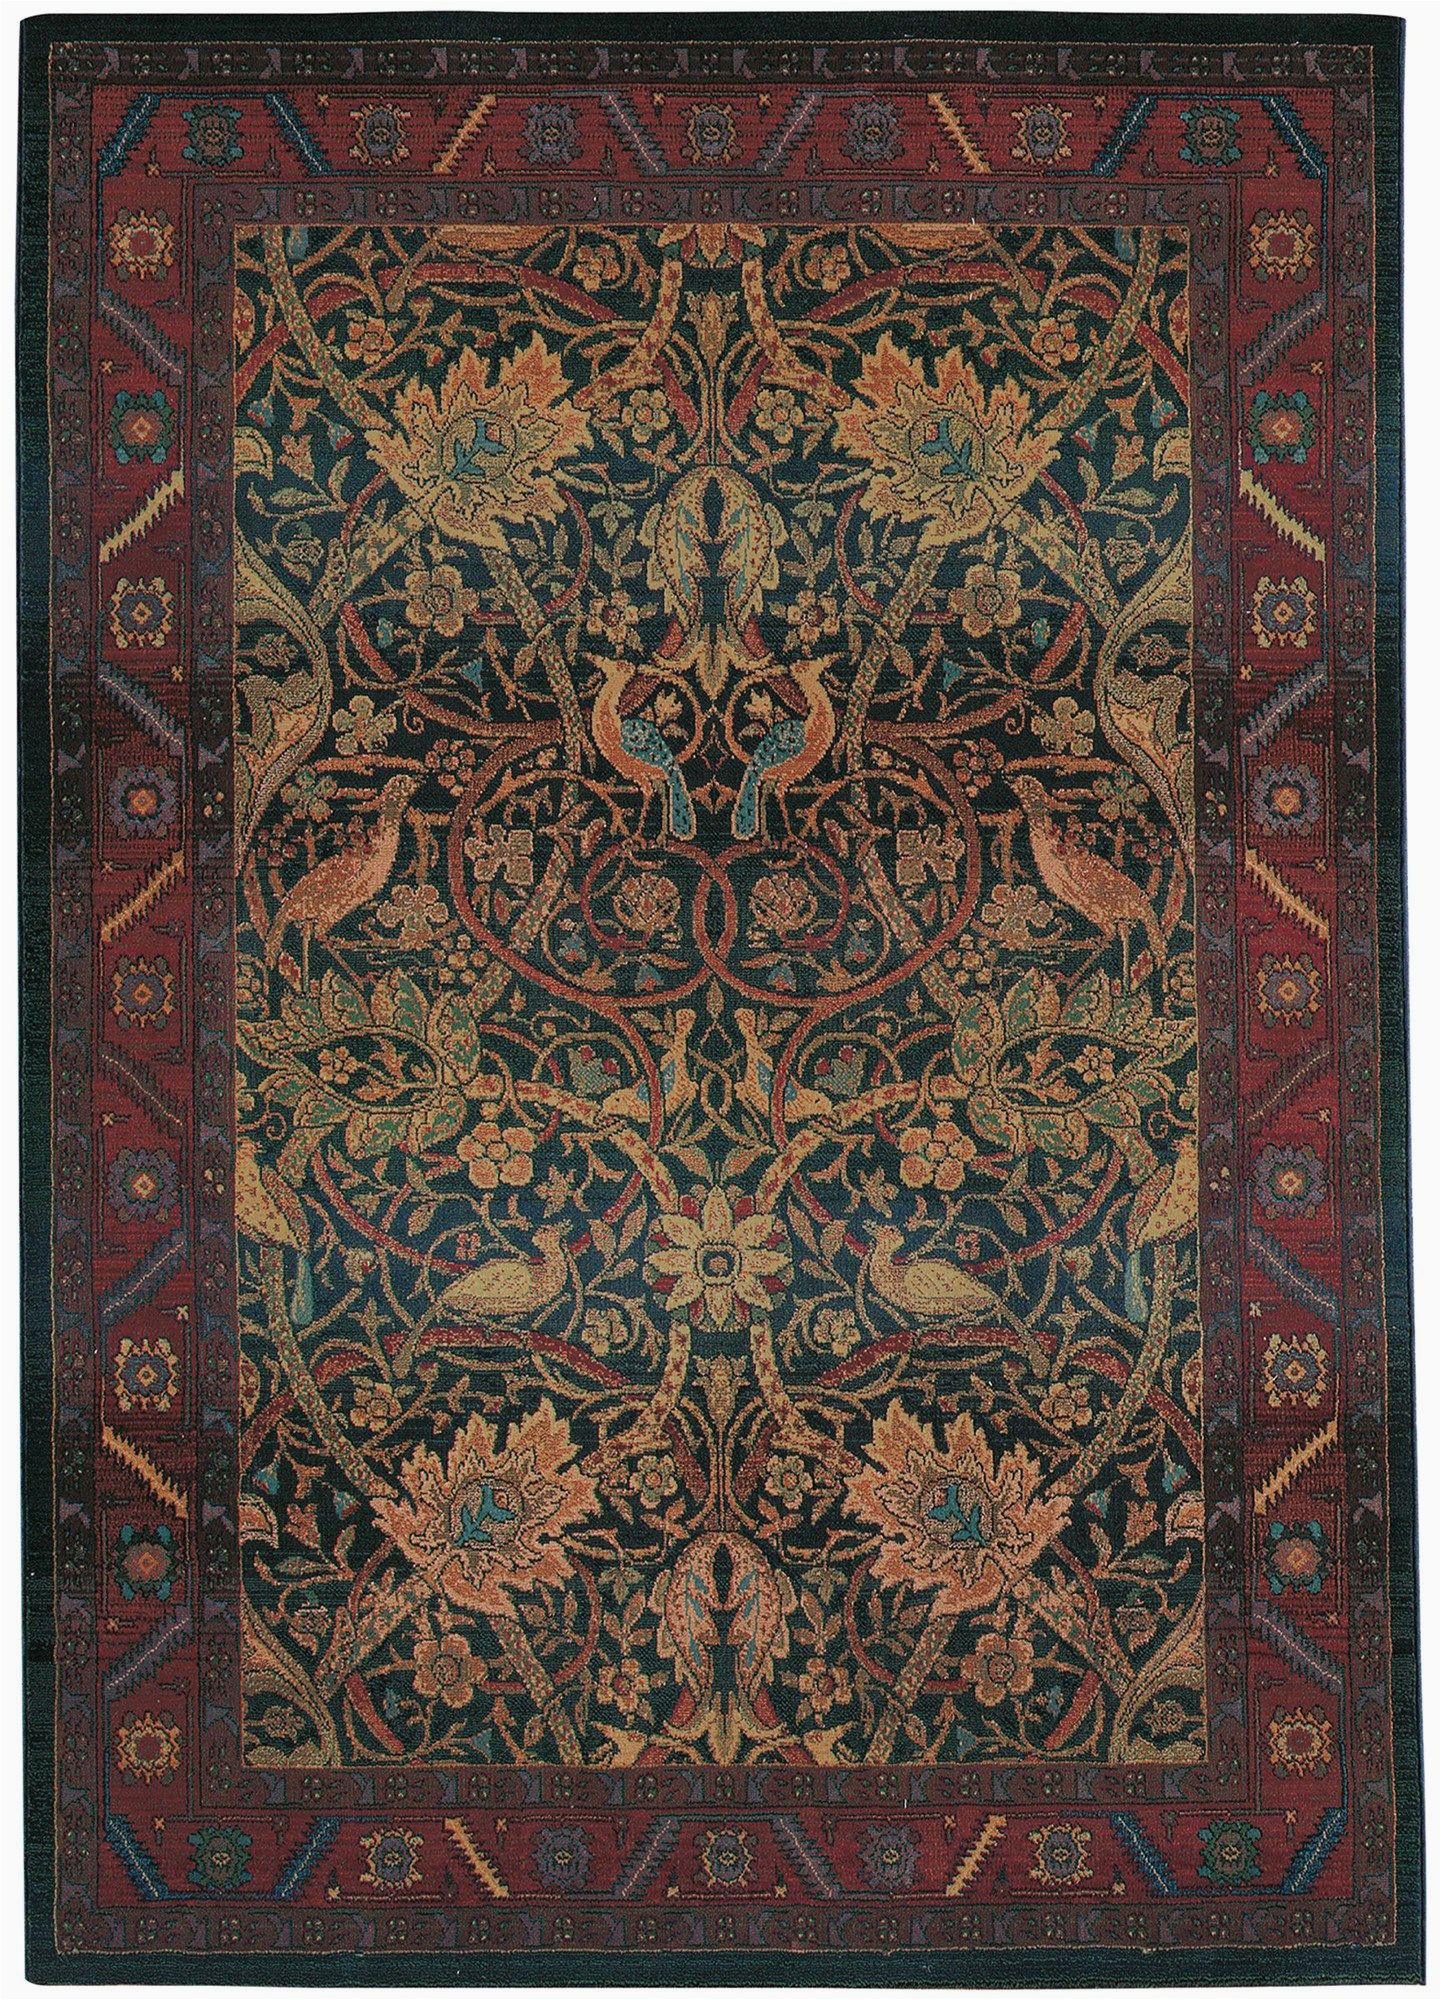 Craftsman Rugs Bungalow area Rug area Rugs In Many Styles Including Contemporary Braided